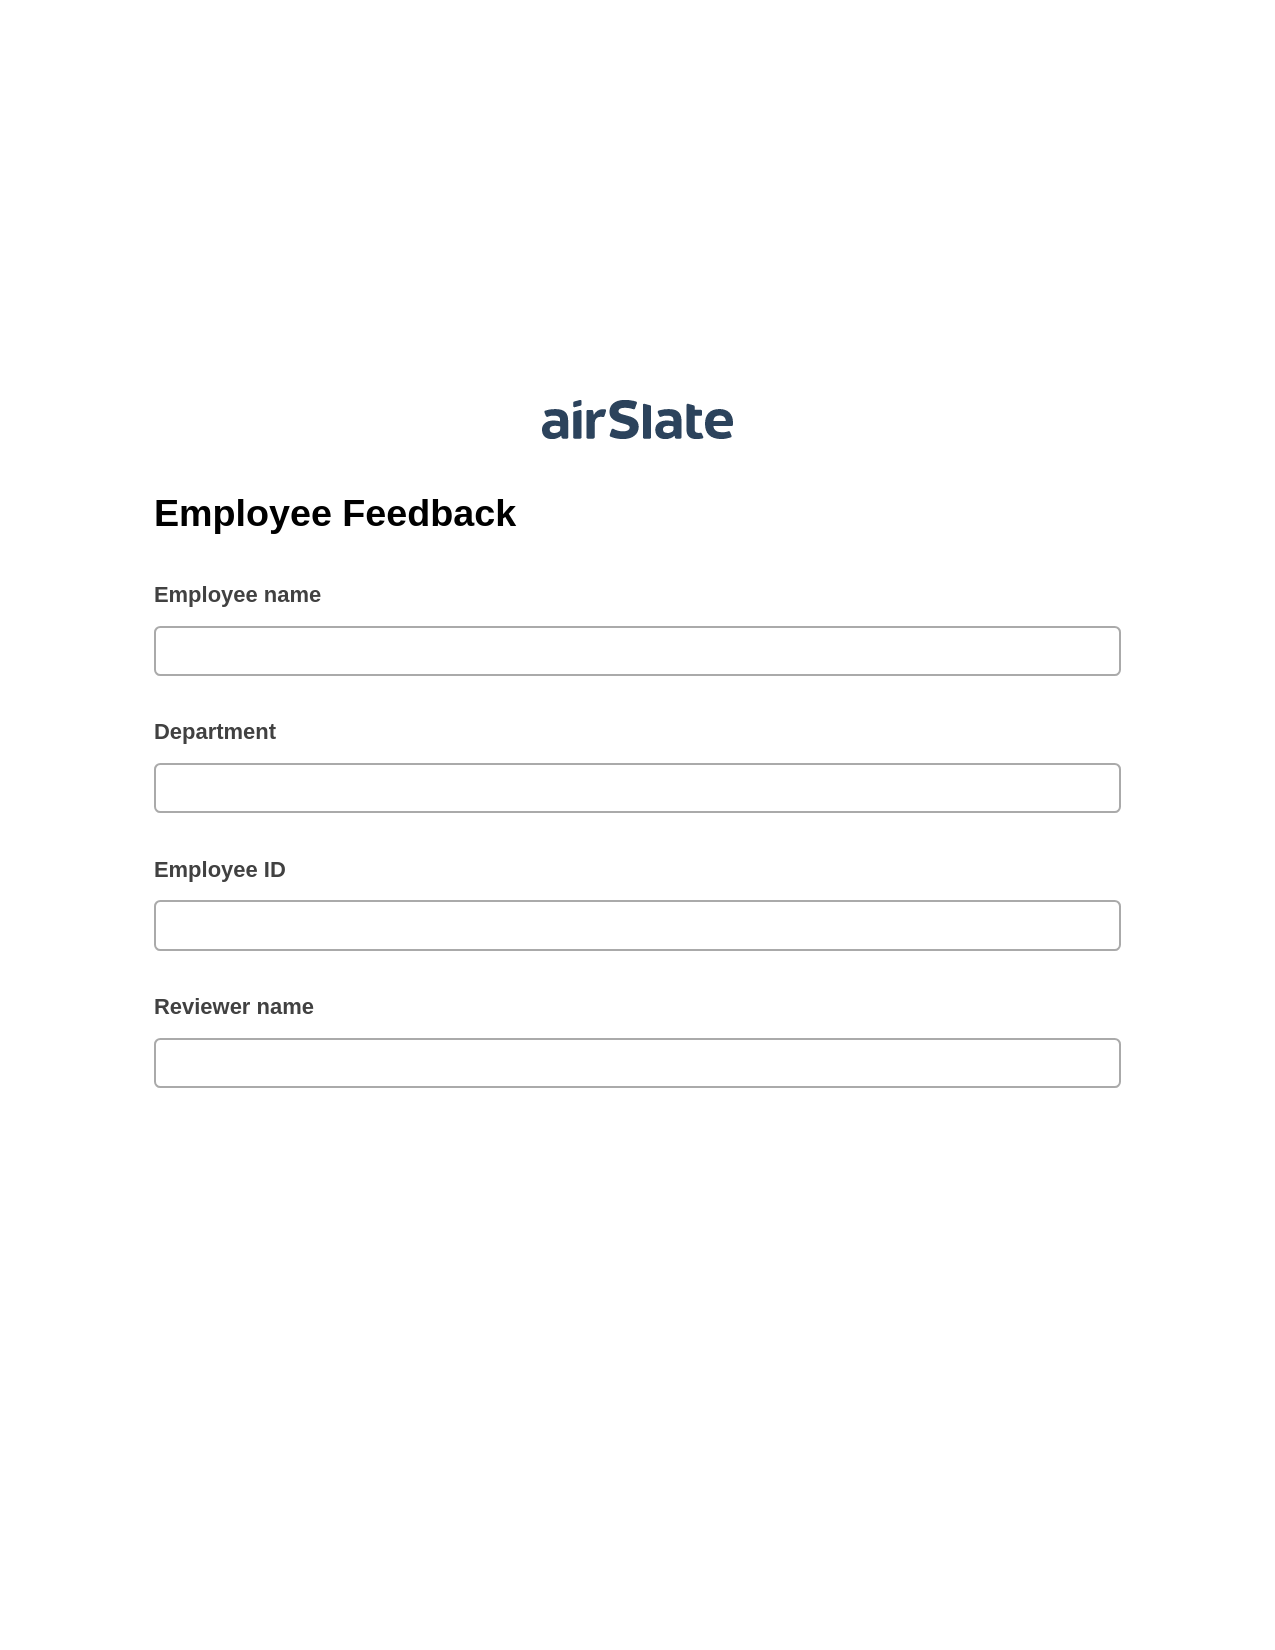 Employee Feedback Pre-fill from Google Sheets Bot, Remove Slate Bot, Export to Smartsheet